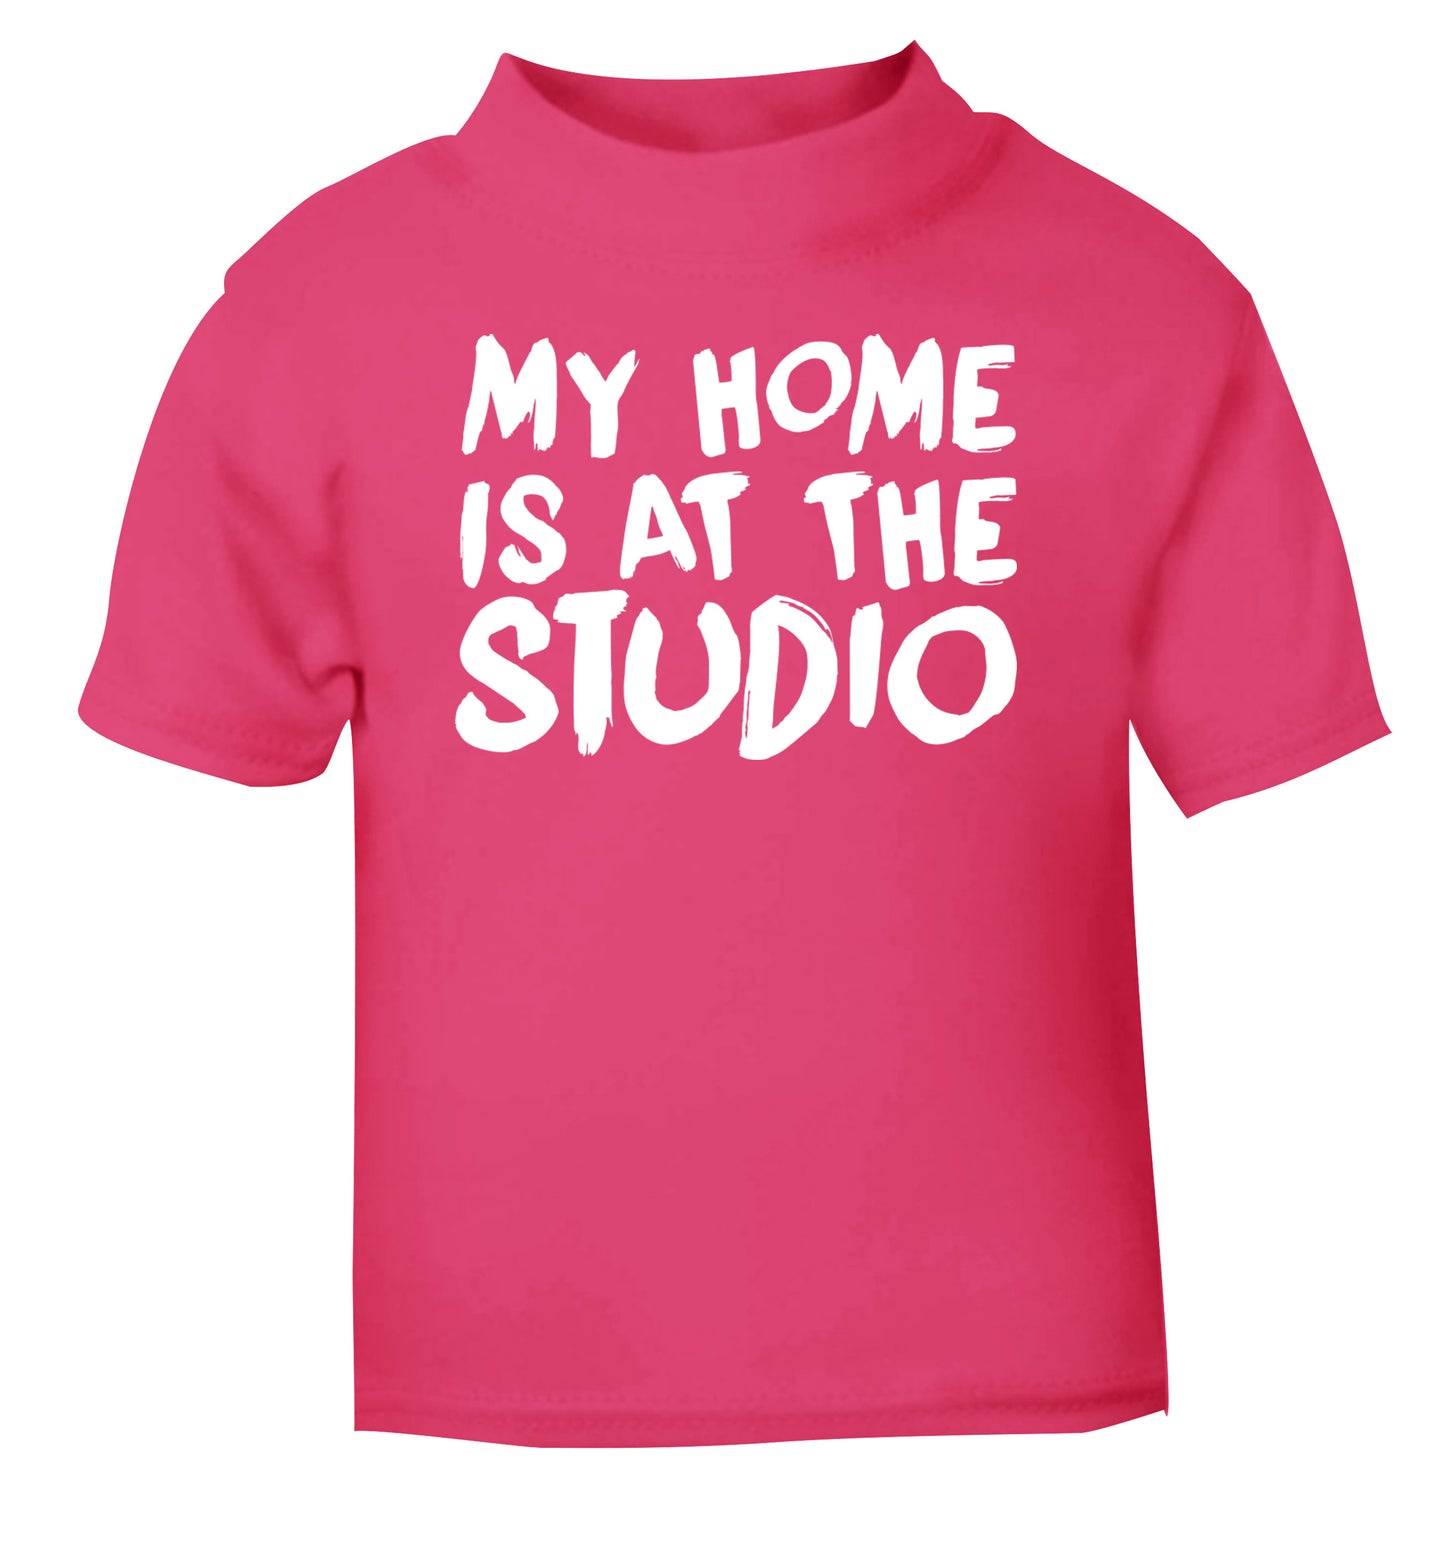 My home is at the studio pink Baby Toddler Tshirt 2 Years